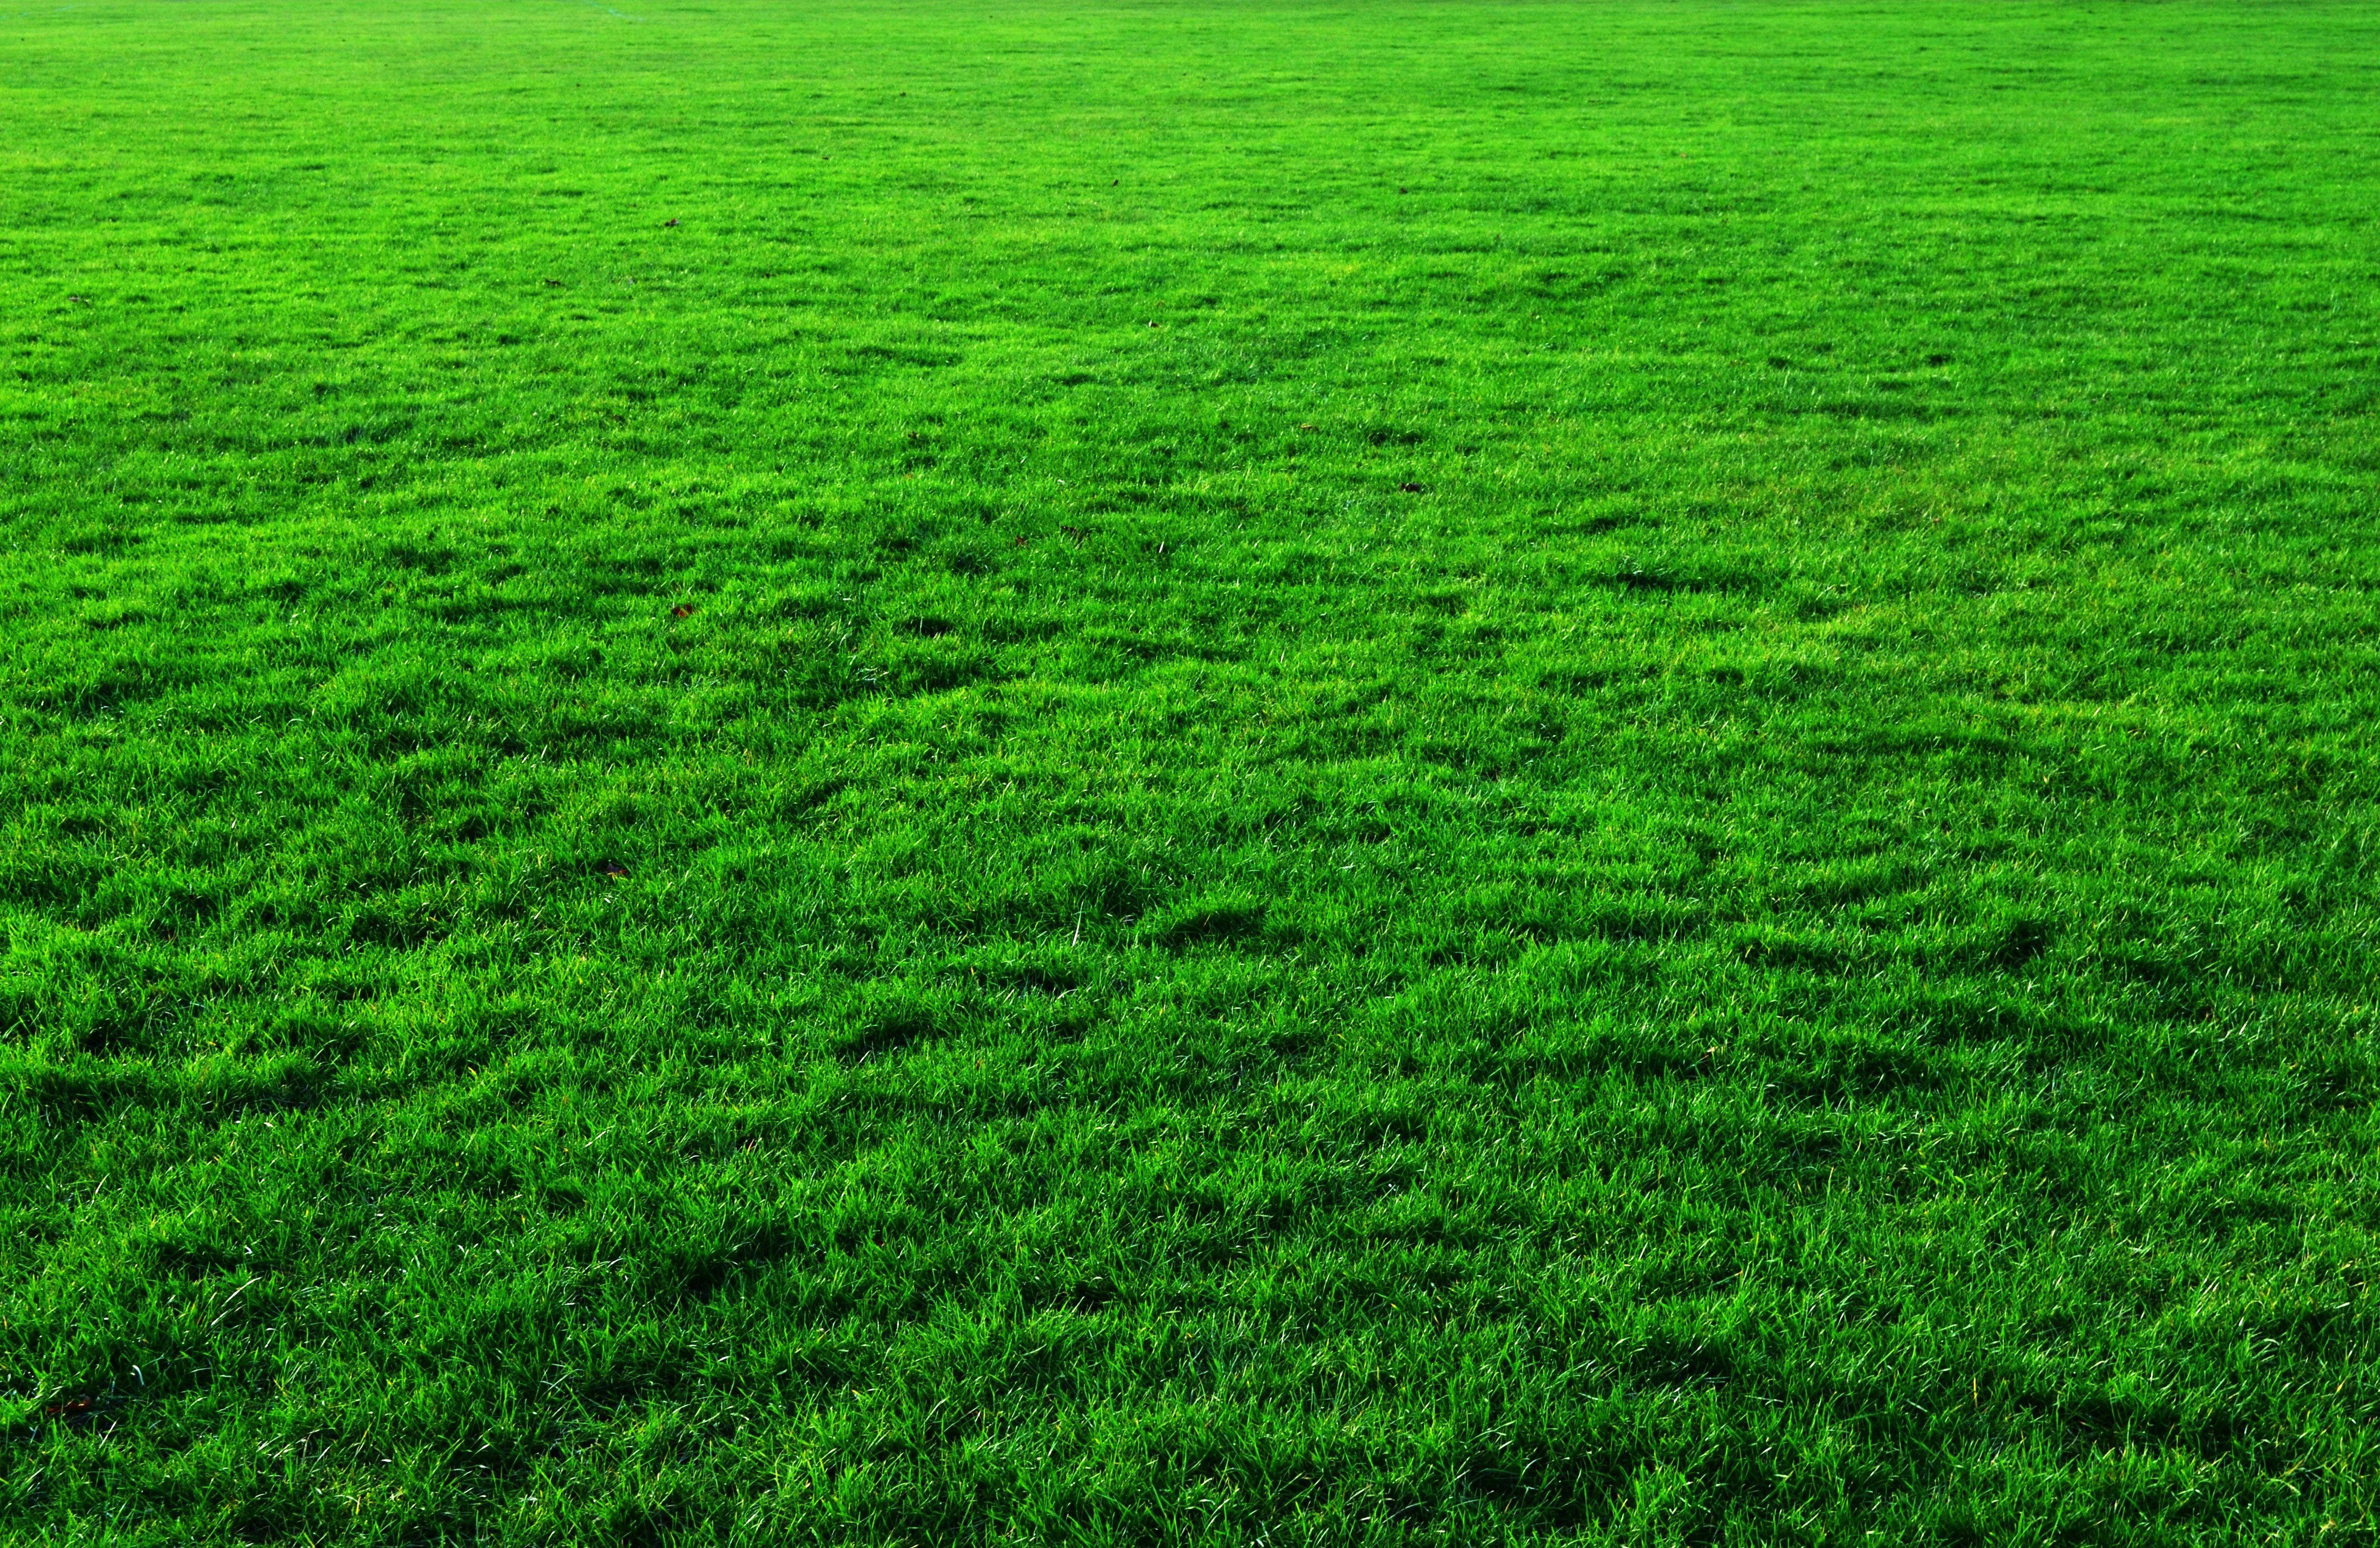 Green Grass Background image Domain